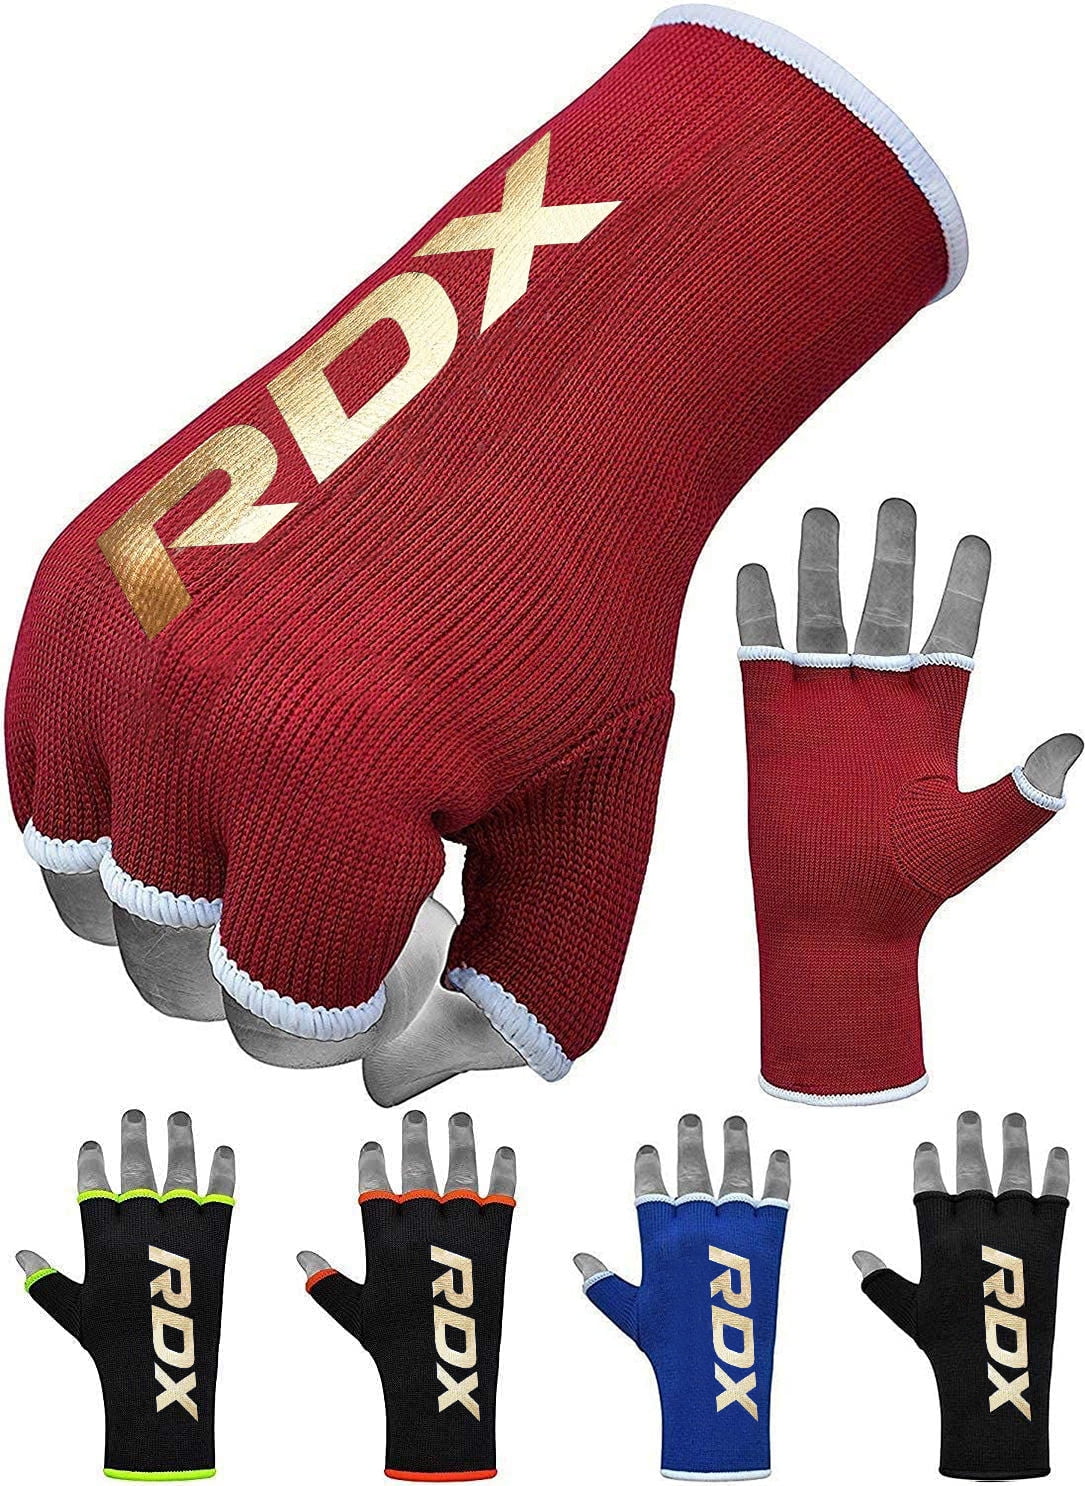 Power Hand Wraps Inner Gloves Bandages MMA Boxing Muay Thai Mexican Stretch. 